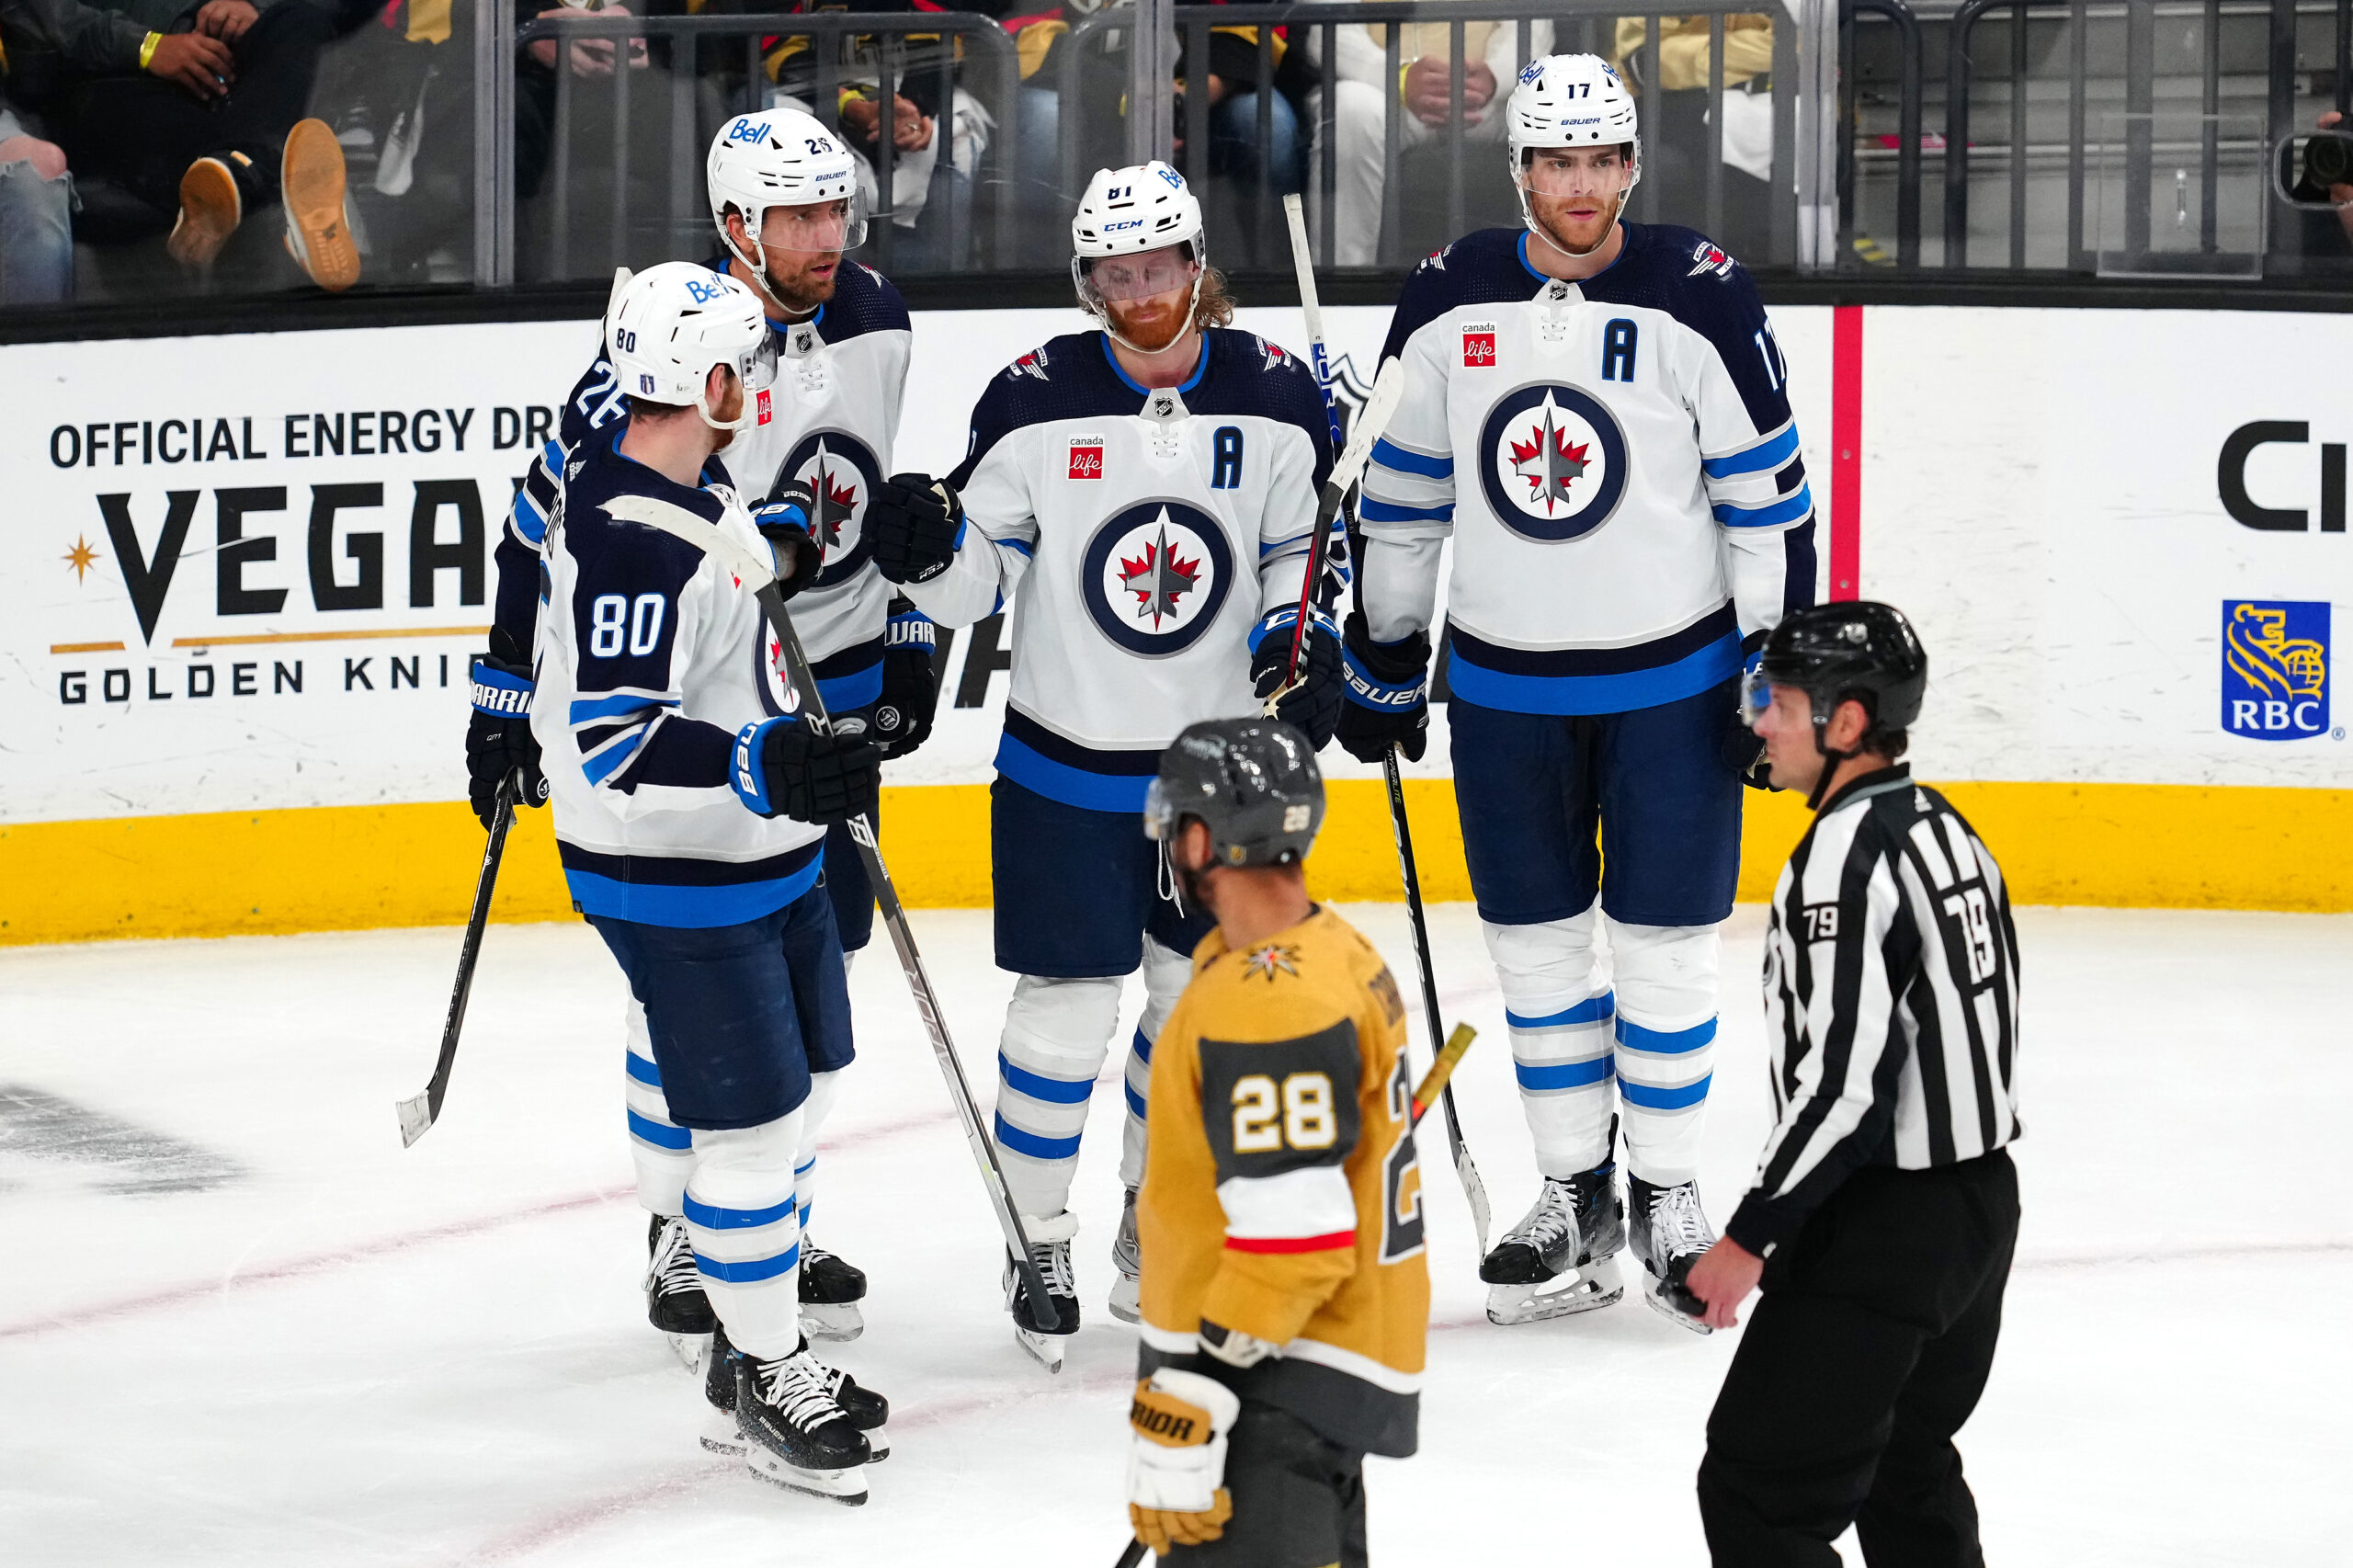 Jets Replacements for Scheifele and Dubois at Centre for 2023-24